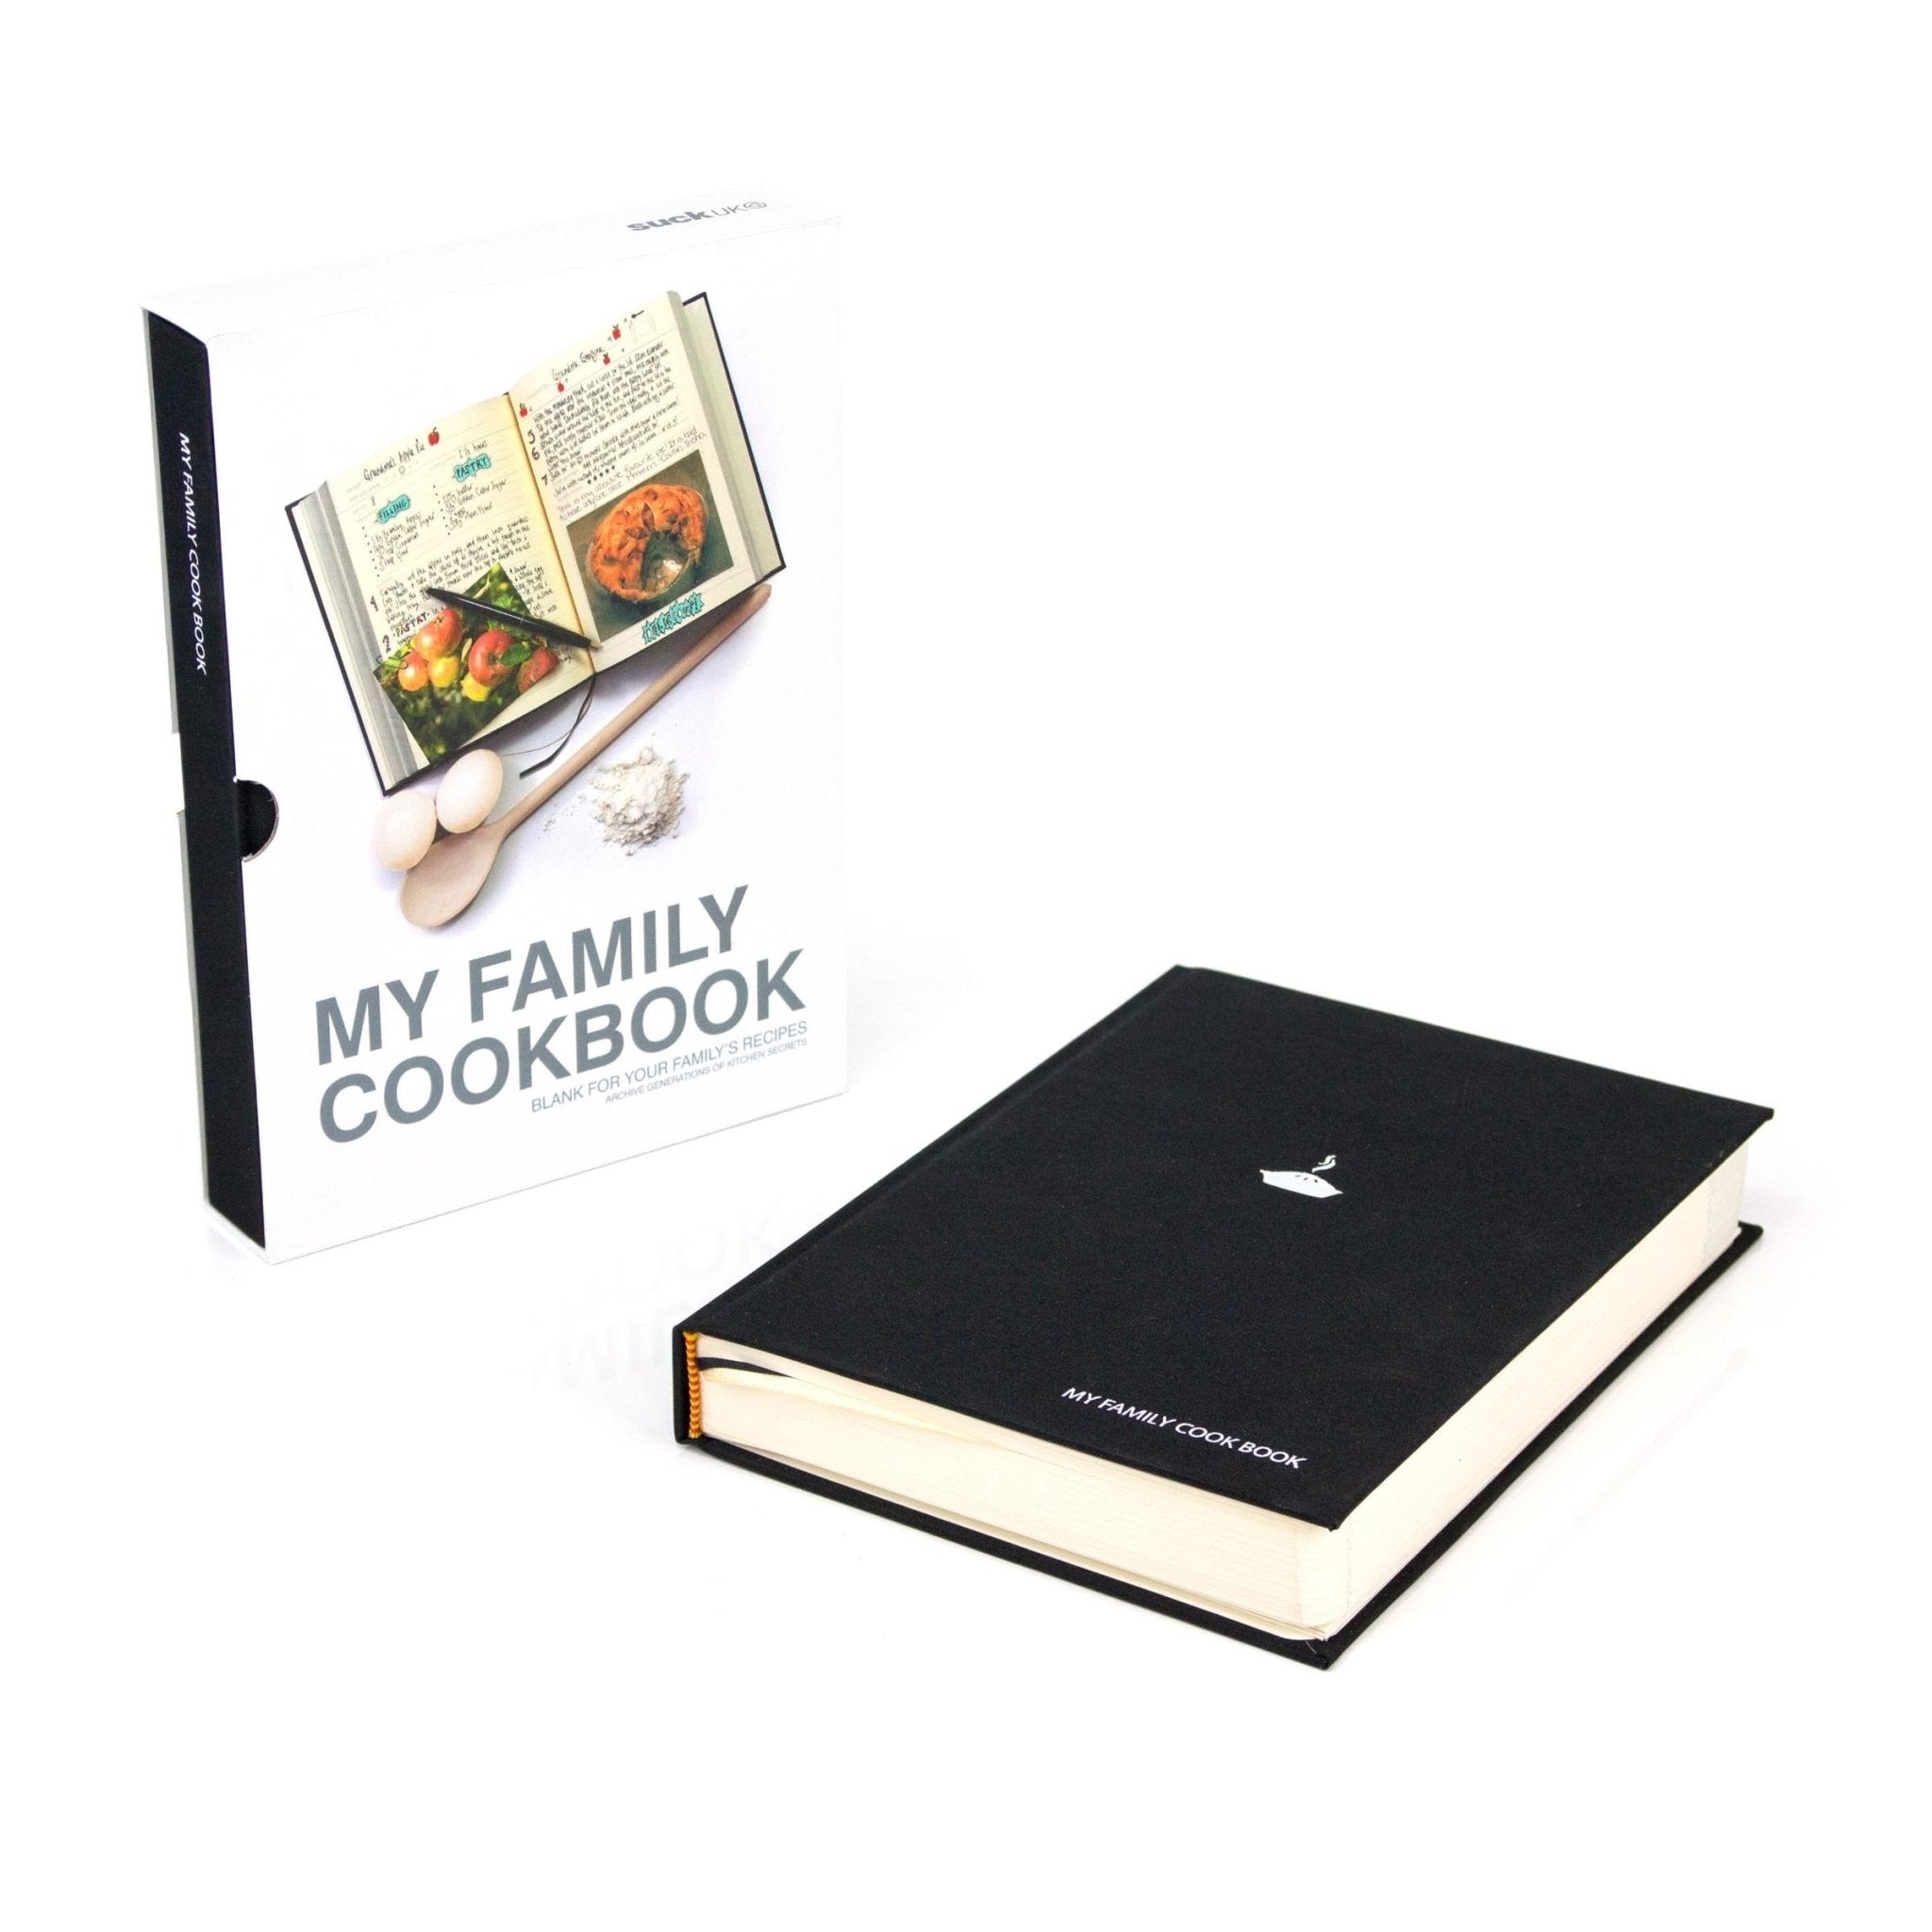 My Family Cookbook - The Flower Crate